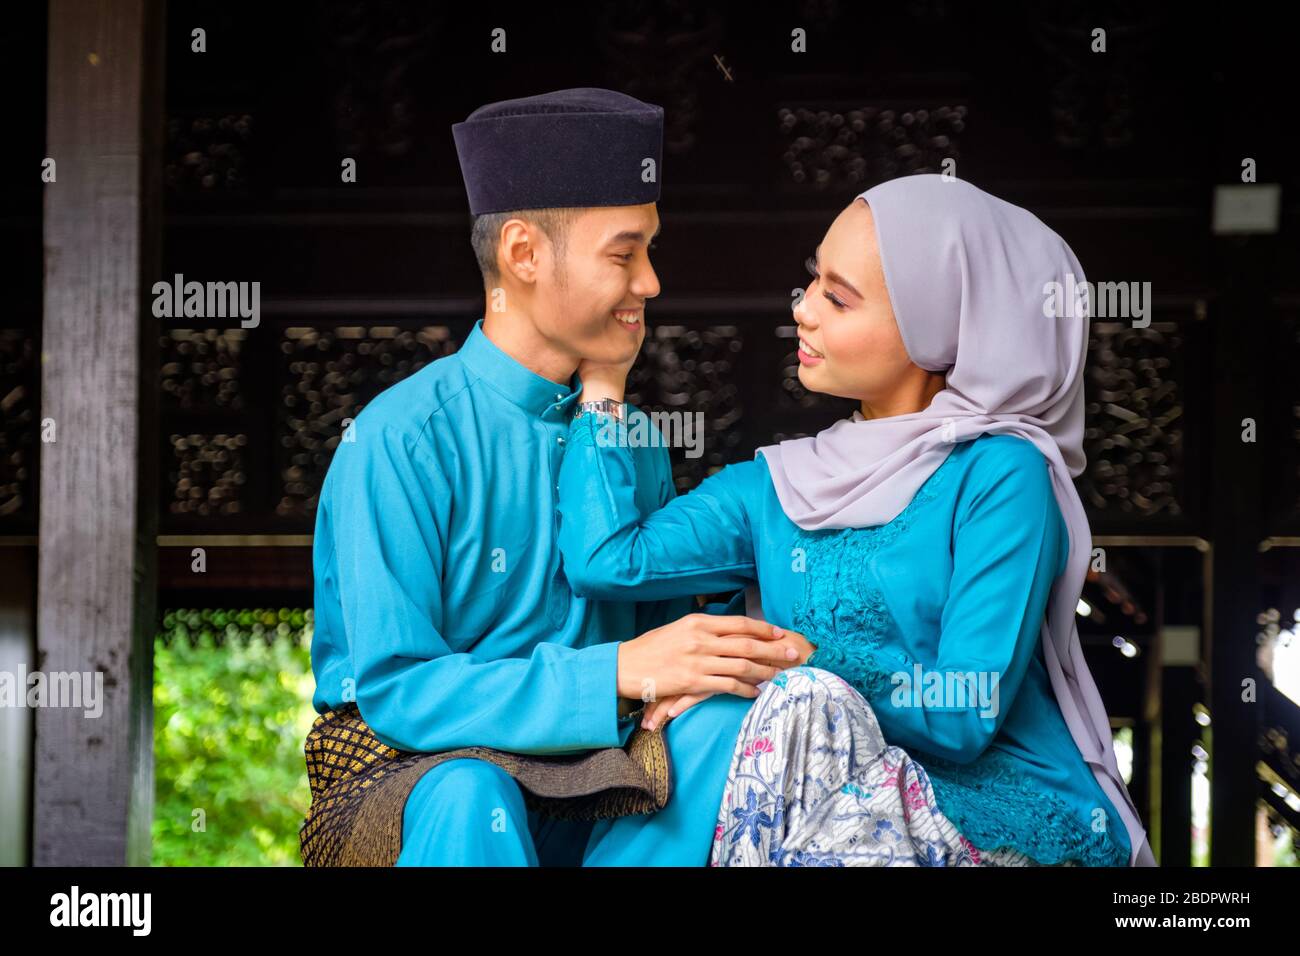 A portrait of young couple of malay muslim in traditional costume showing romantic gesture during Aidilfitri celebration at the traditional wooden hou Stock Photo